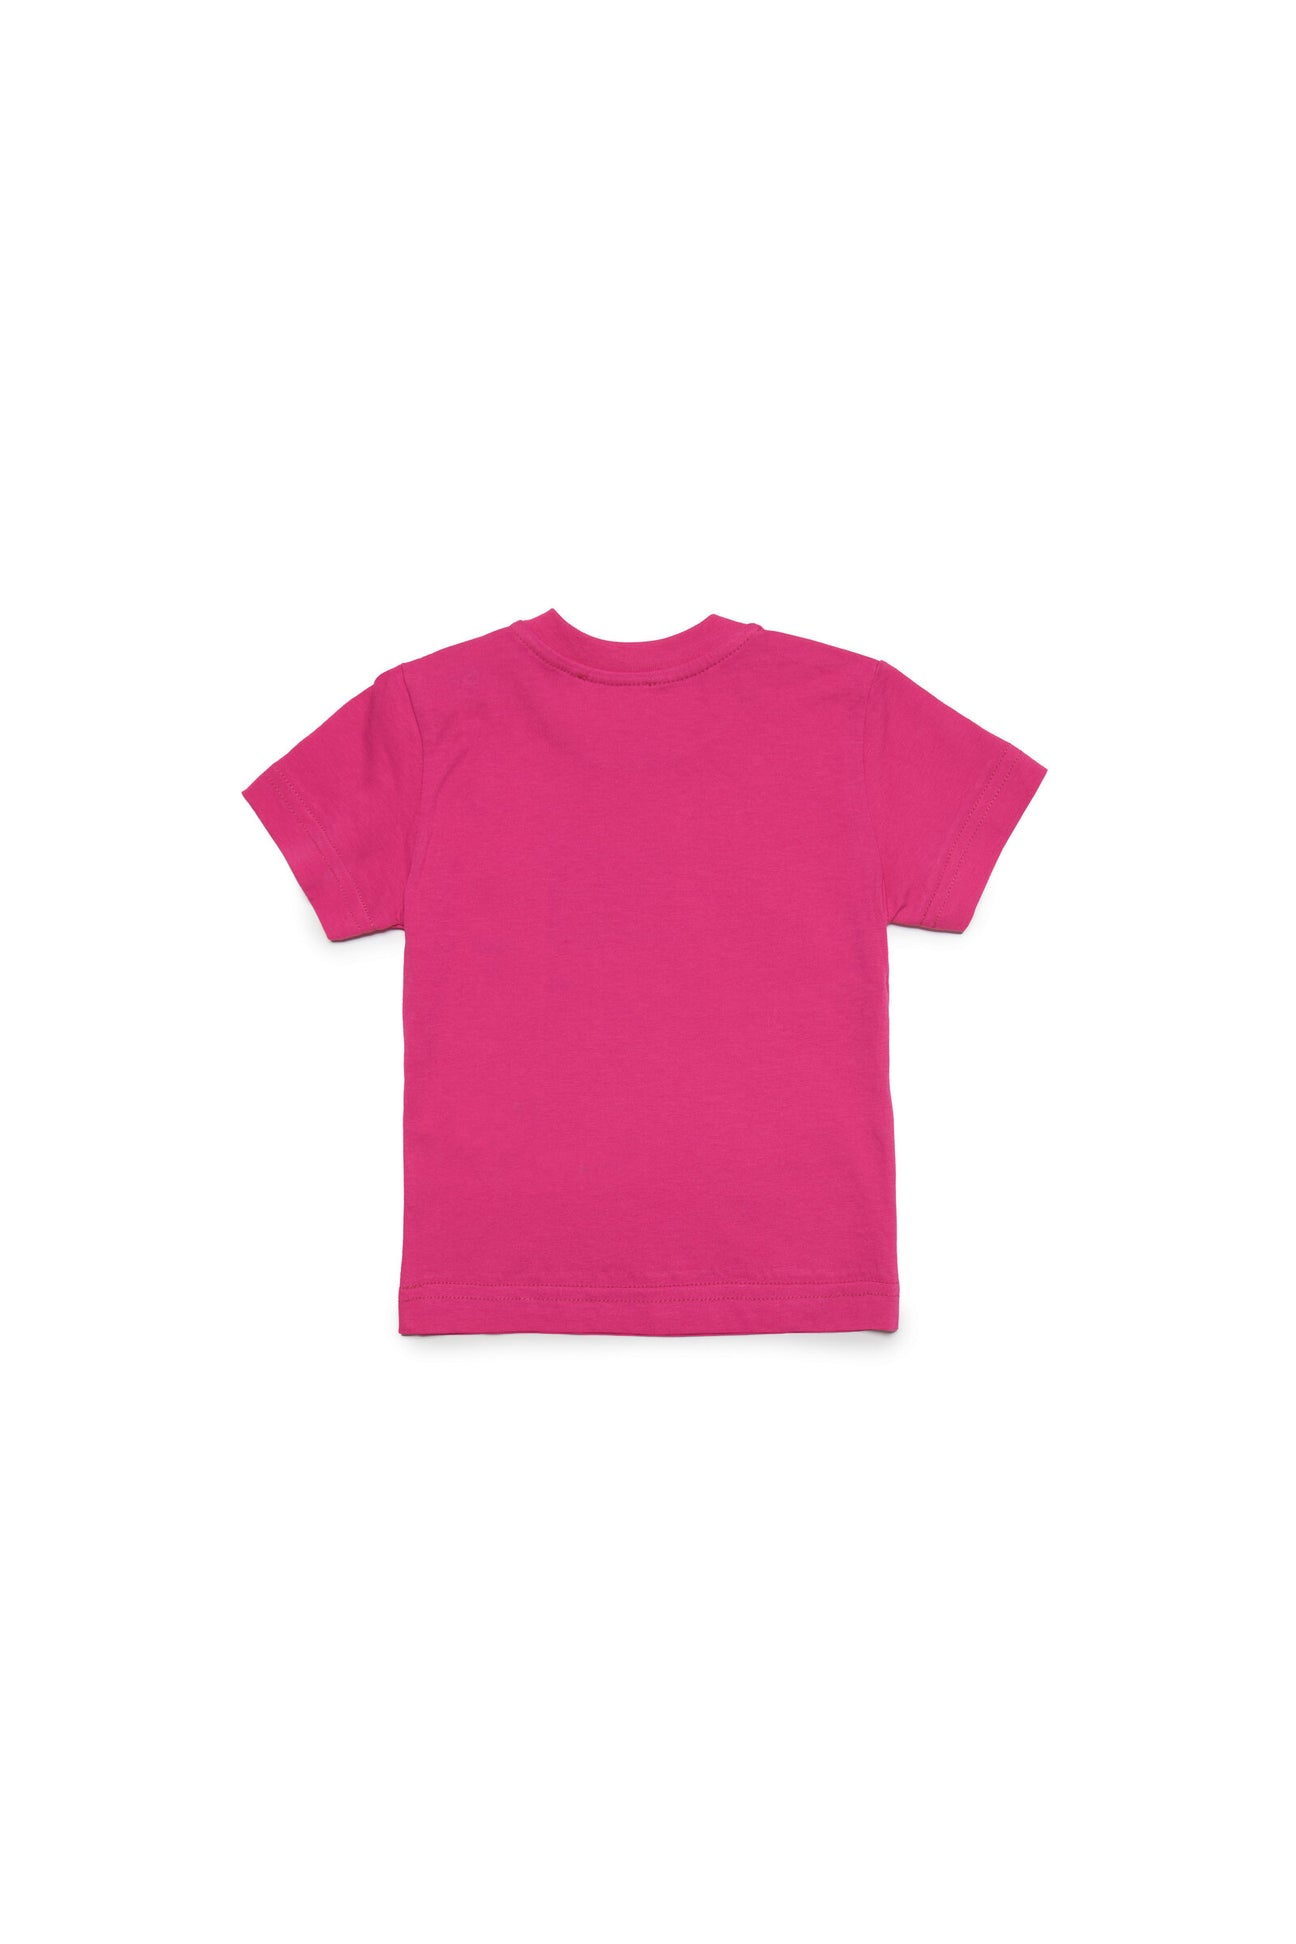 Fuchsia t-shirt with Diesel double logo and snap button closure Fuchsia t-shirt with Diesel double logo and snap button closure